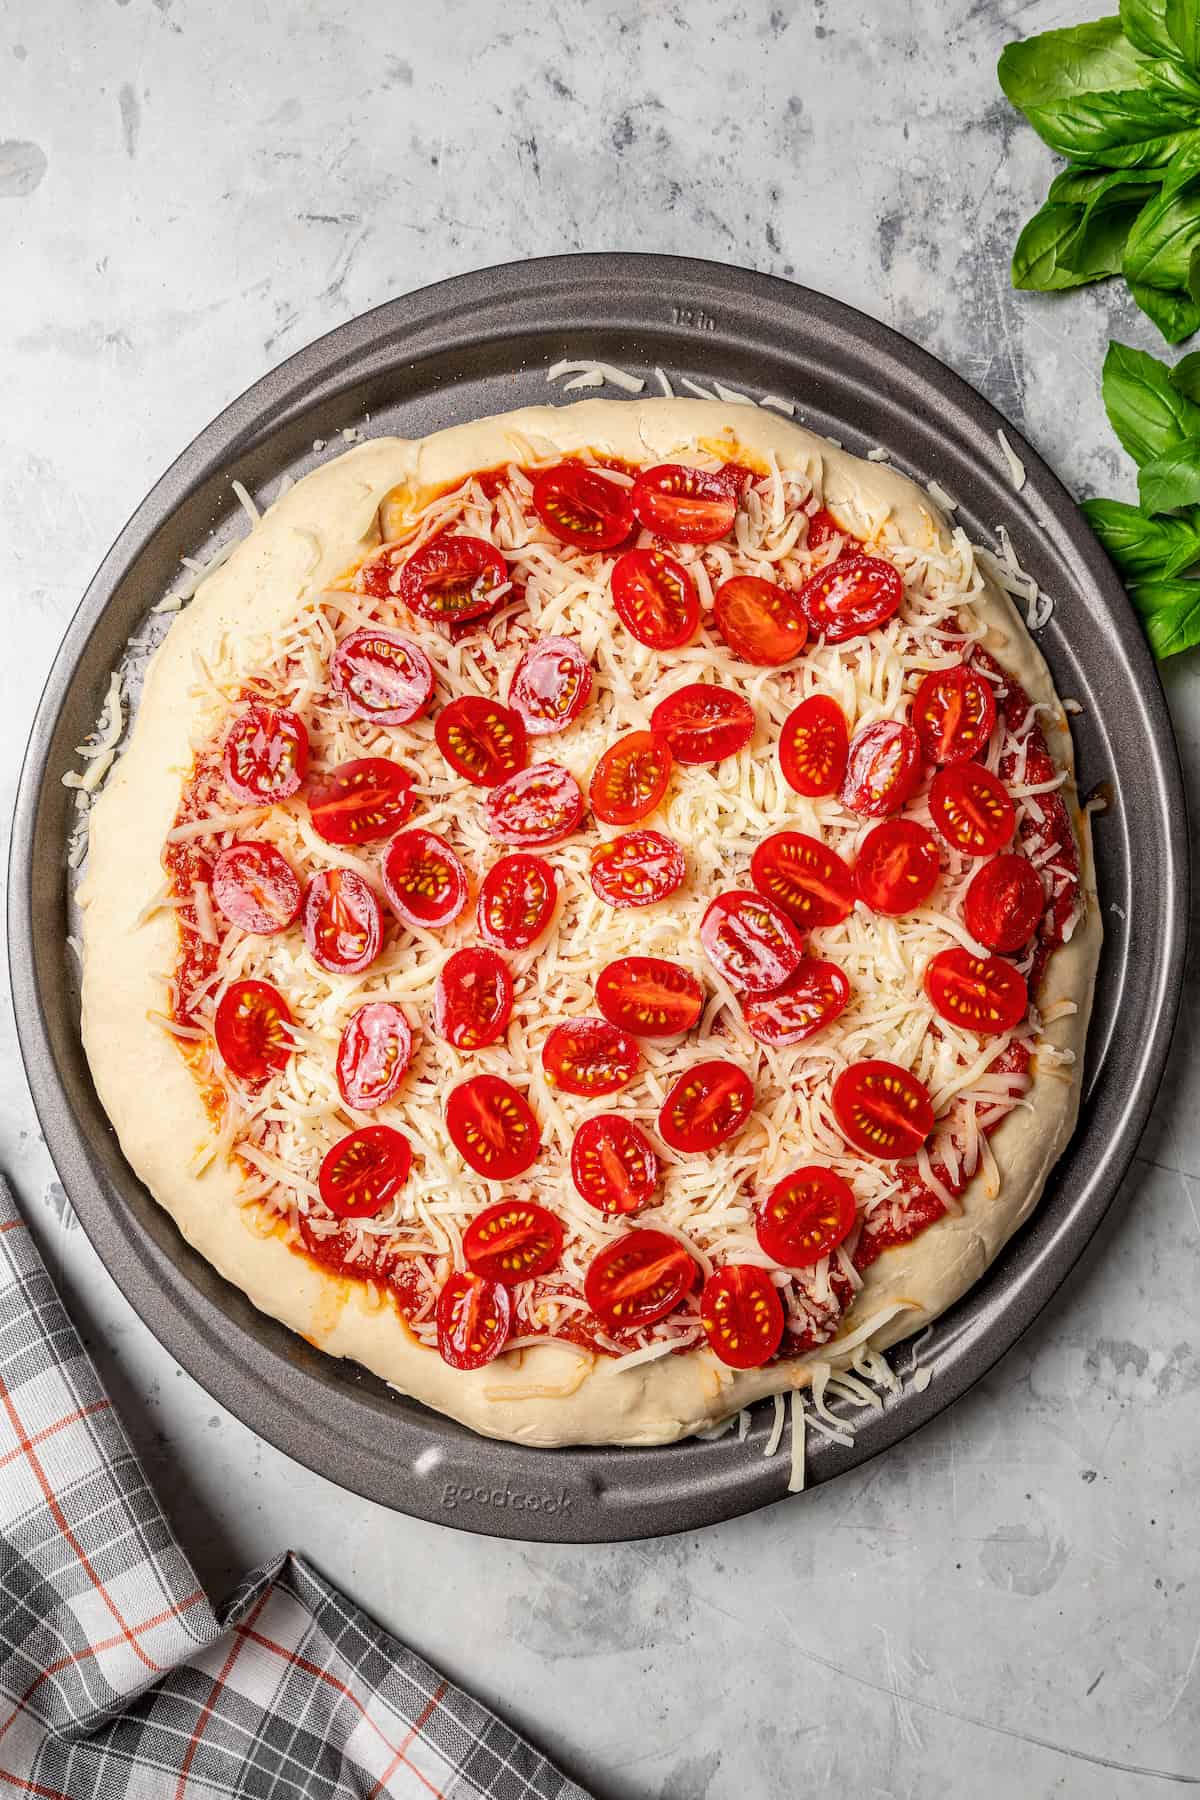 Pizza crust topped with sauce, shredded cheese, and sliced grape tomatoes.